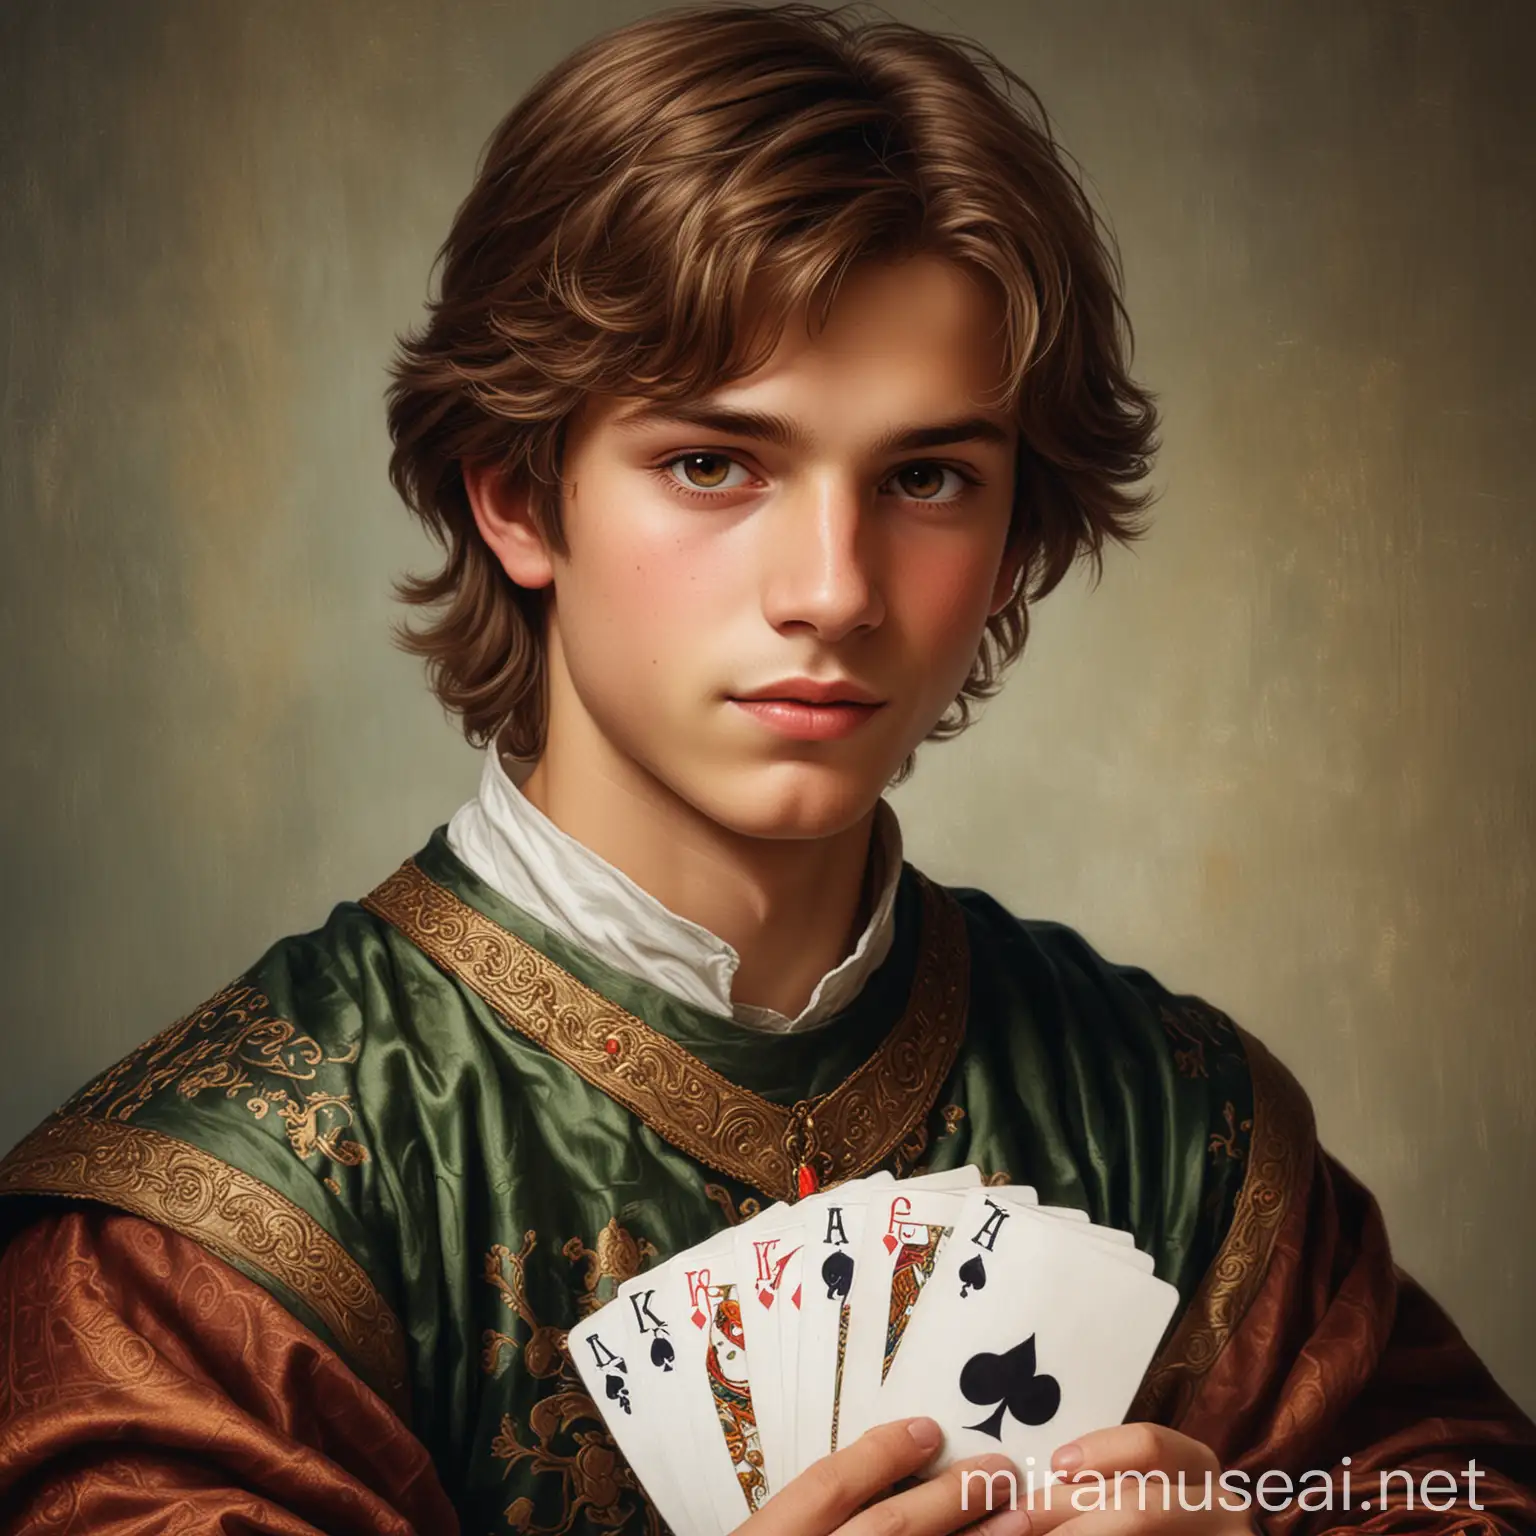 A medieval prince with brown hair, brown eyes and fair skin. He is fifteen years old and he is playing cards